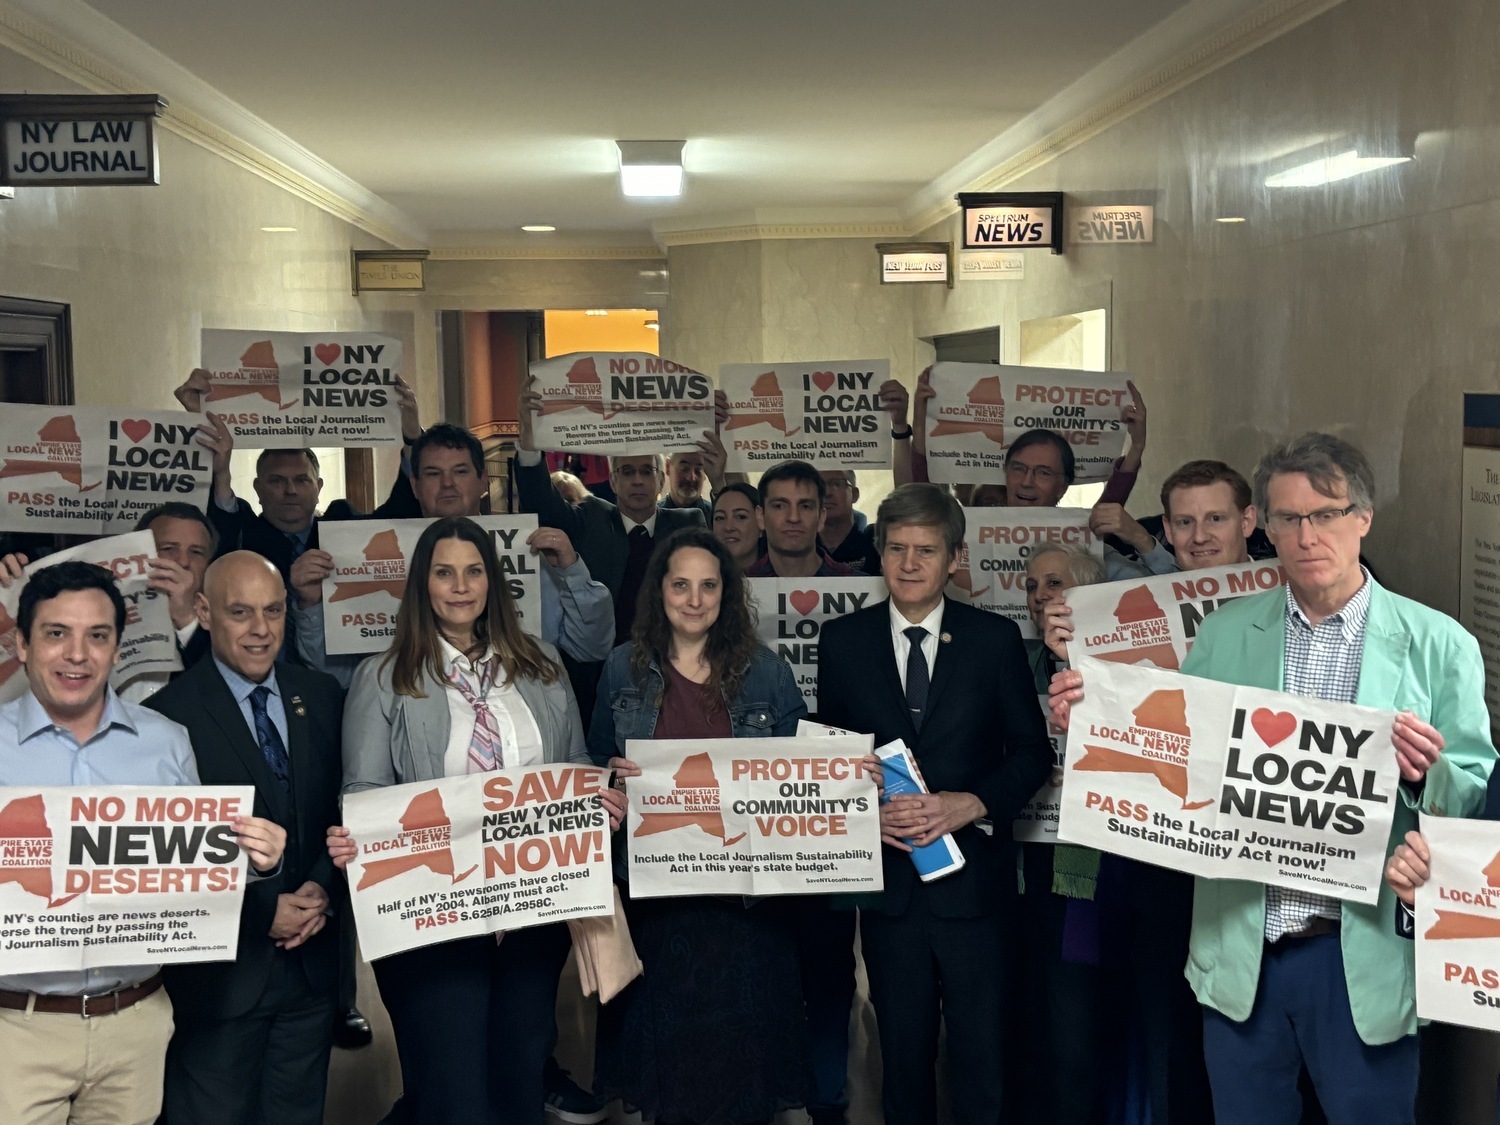 Express News Group Publisher Gavin Menu (second row, third from left) joined members of the Empire State Local News Coalition on March 20 for a rally in Albany in support of the Local Journalism Sustainability Act.